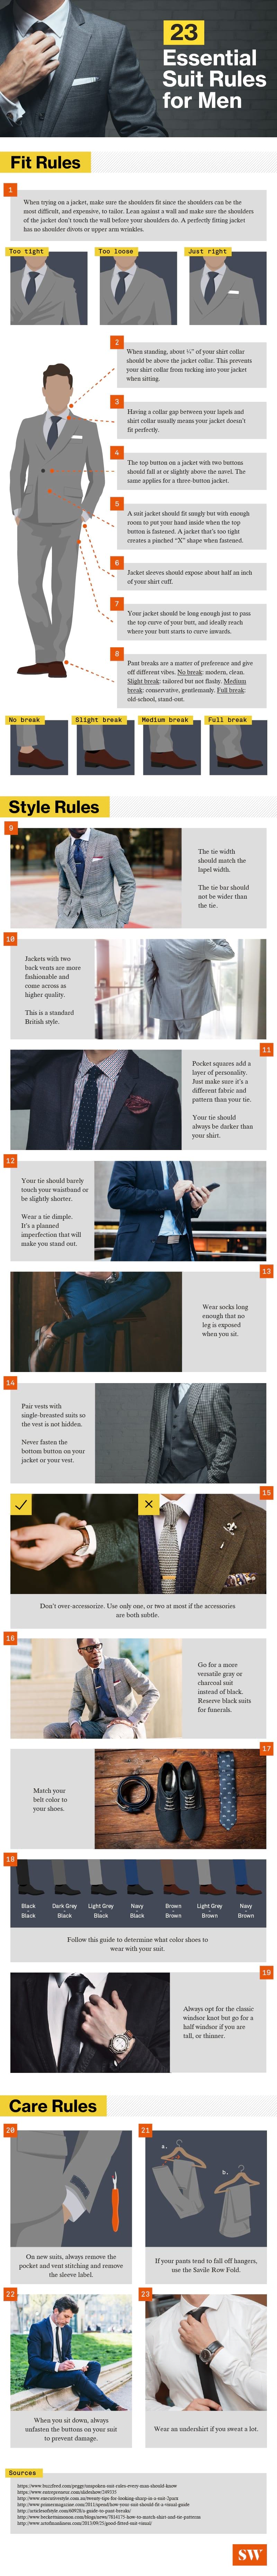 suit fitting guide